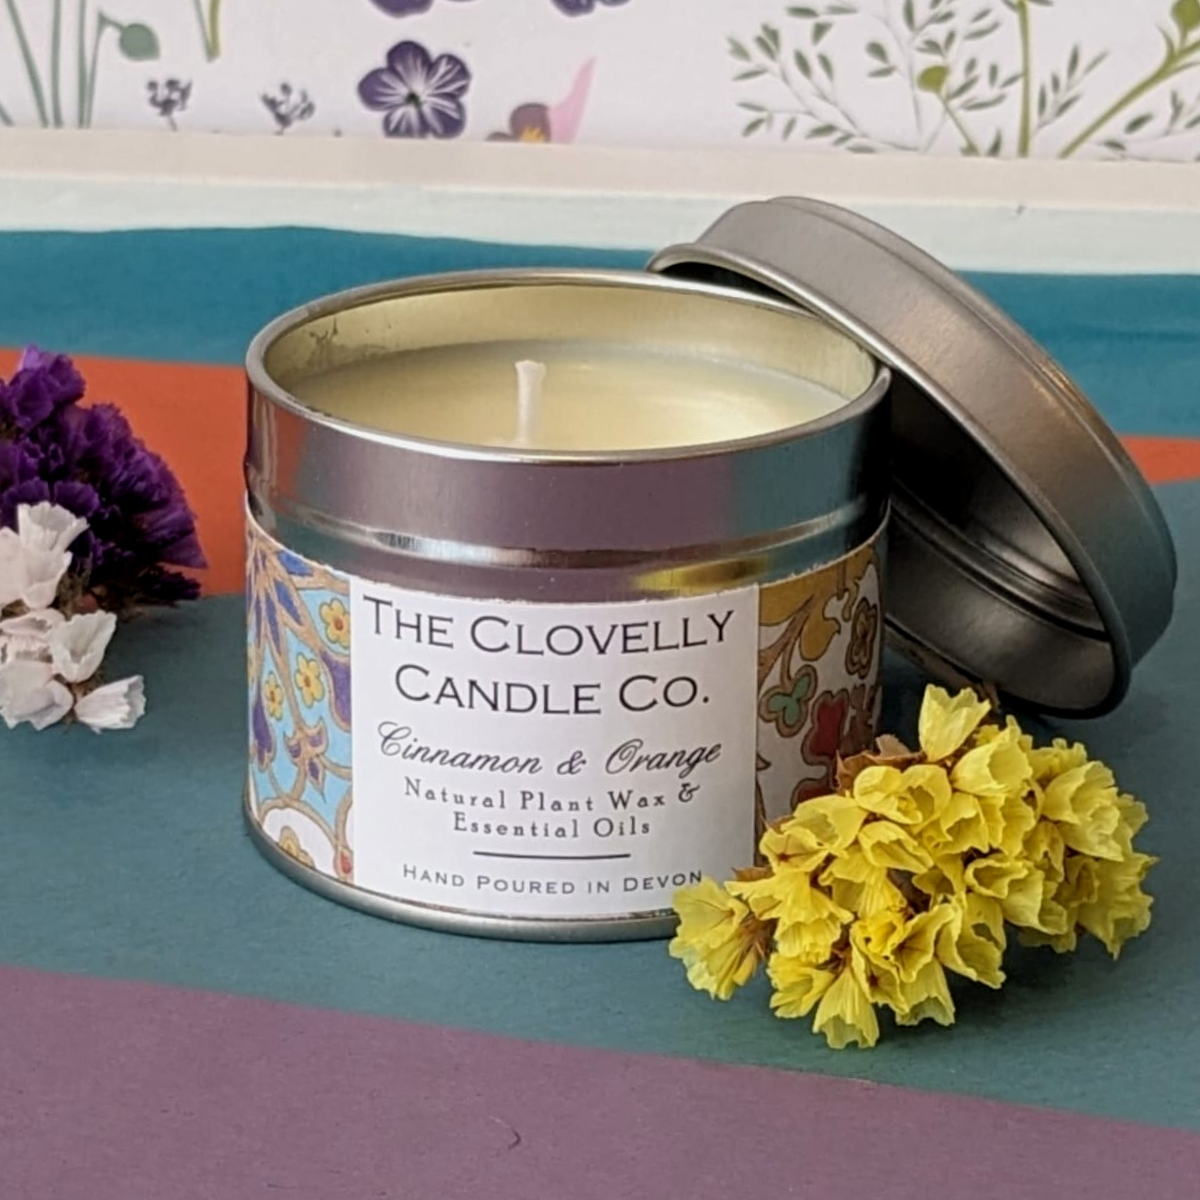 Clovelly cinnamon & orange essential oil candle in tin